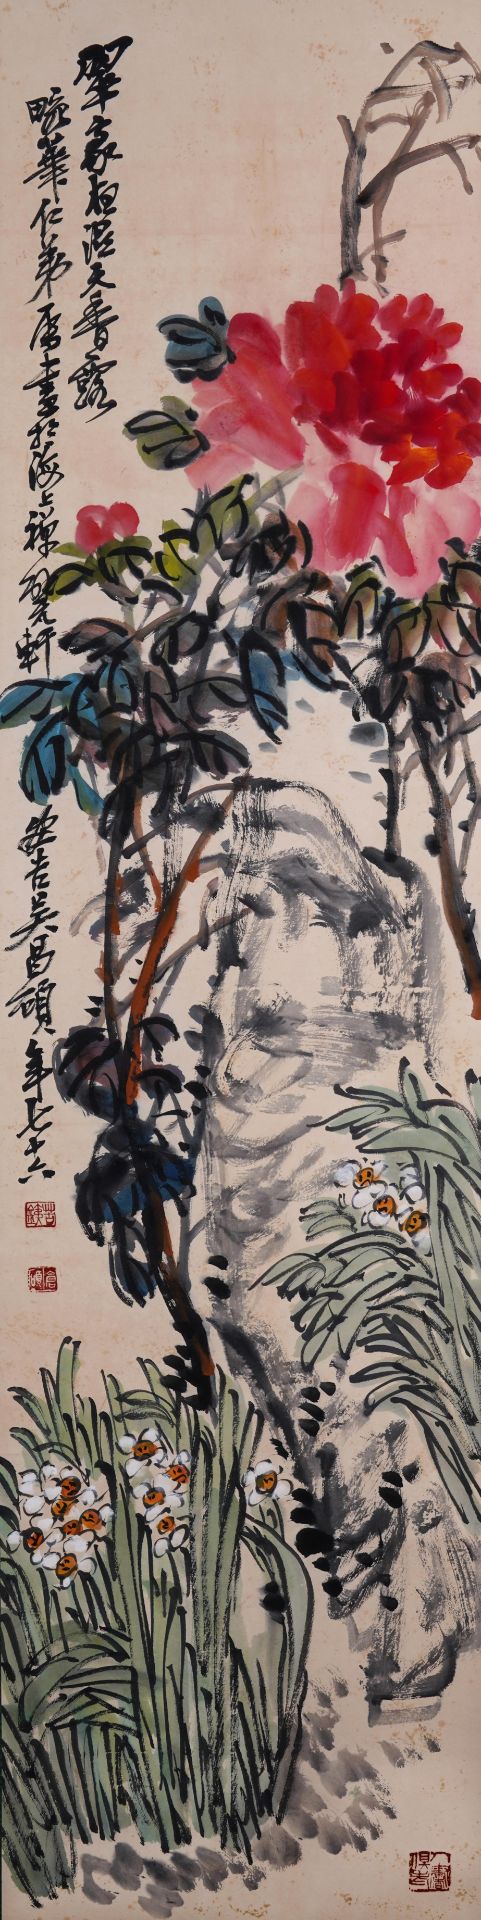 A Chinese Scroll Painting by Wu Changshuo - Bild 3 aus 27